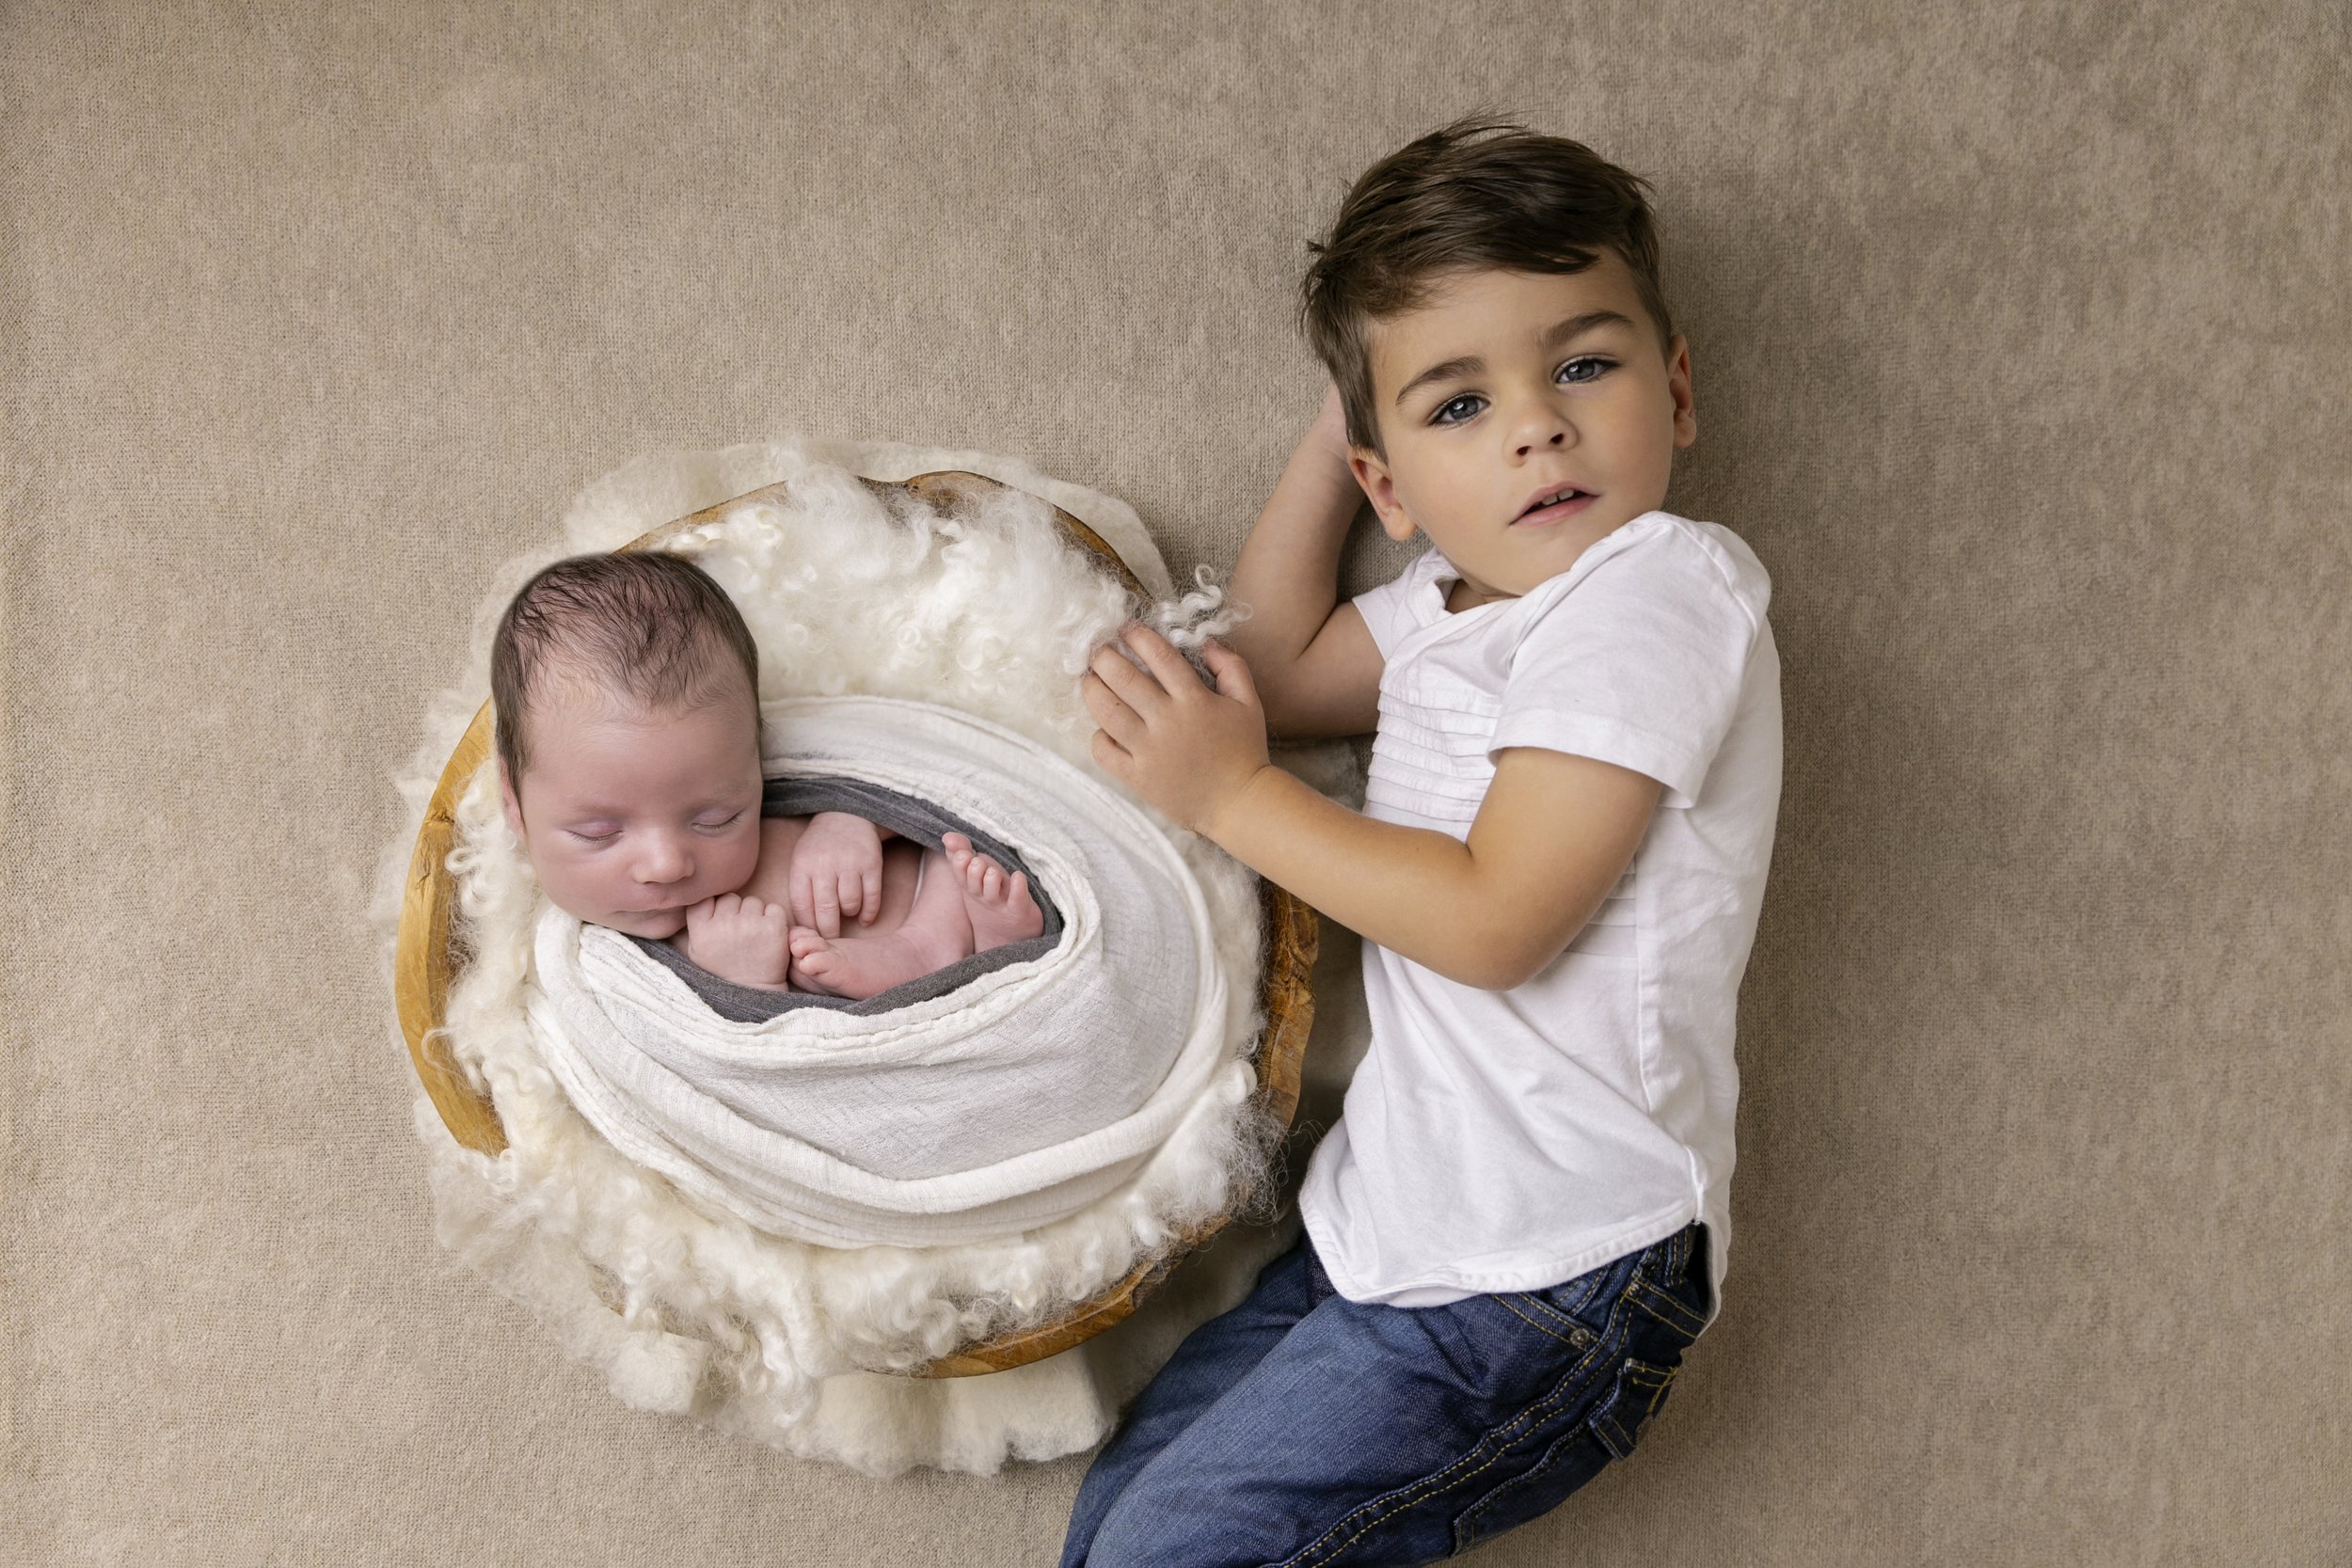 gold coast family photographer studio photo session brother baby sibling jade read